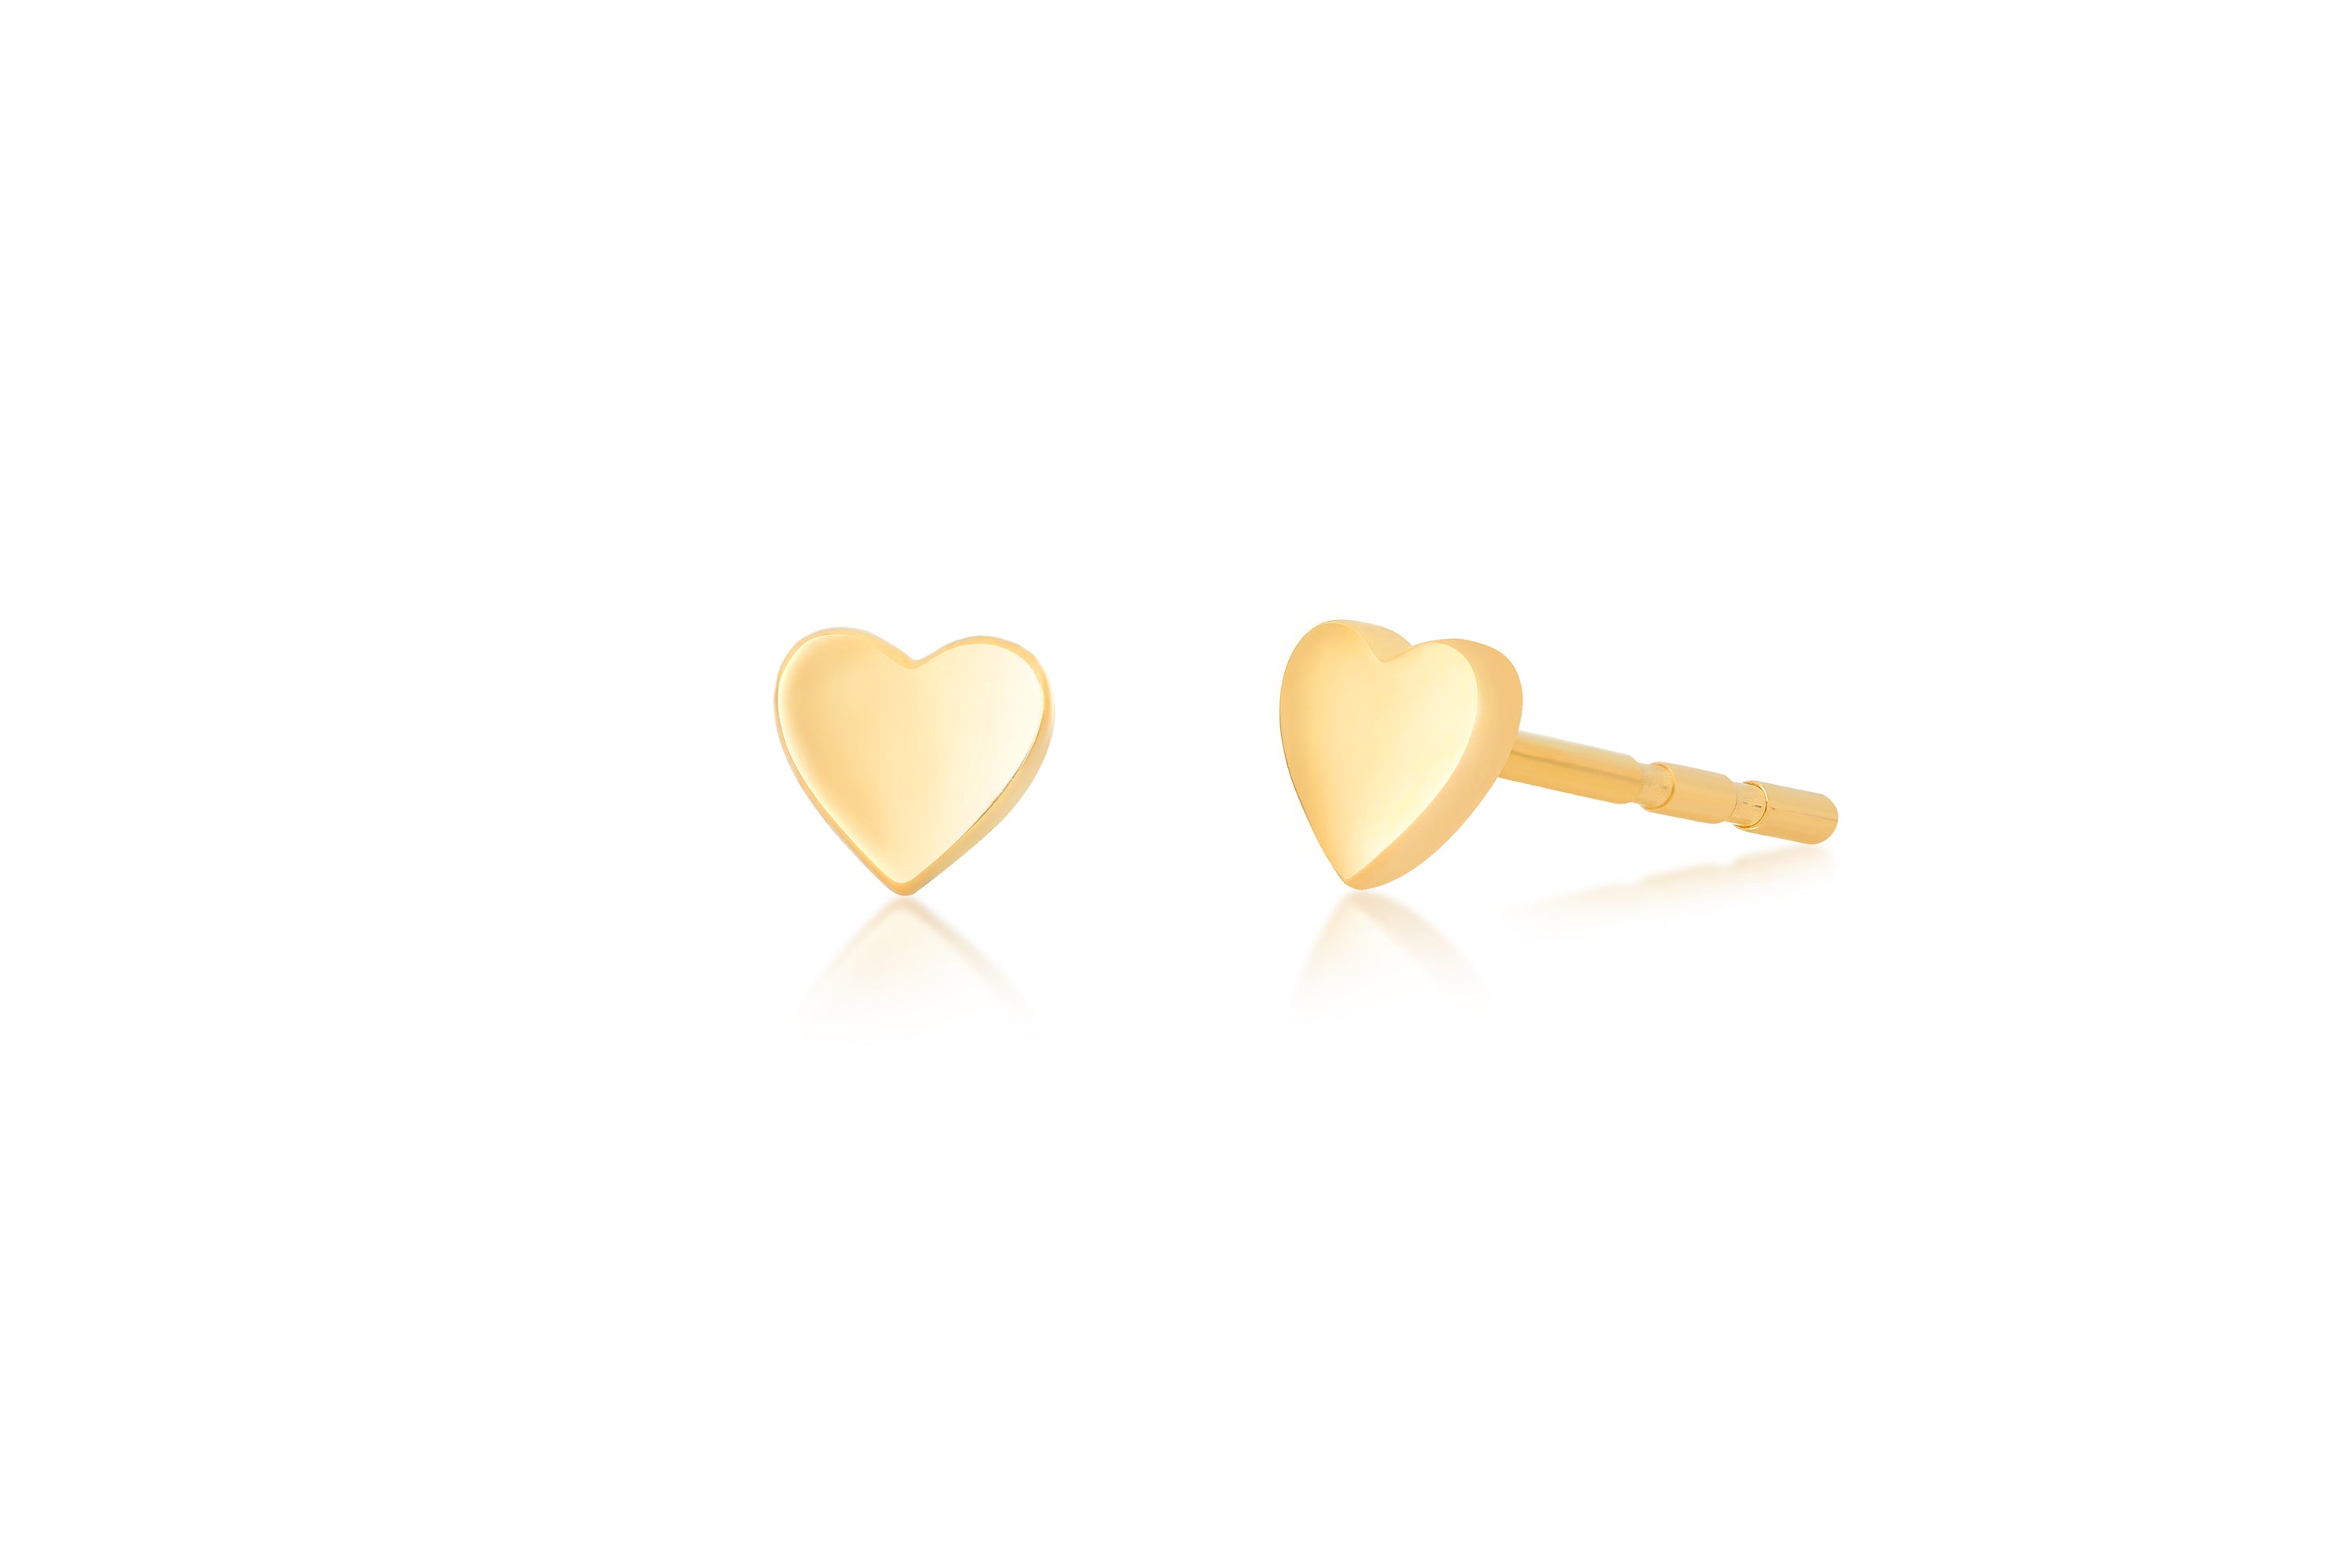 14k (karat) yellow gold tiny heart stud earring with butterfly post backs.